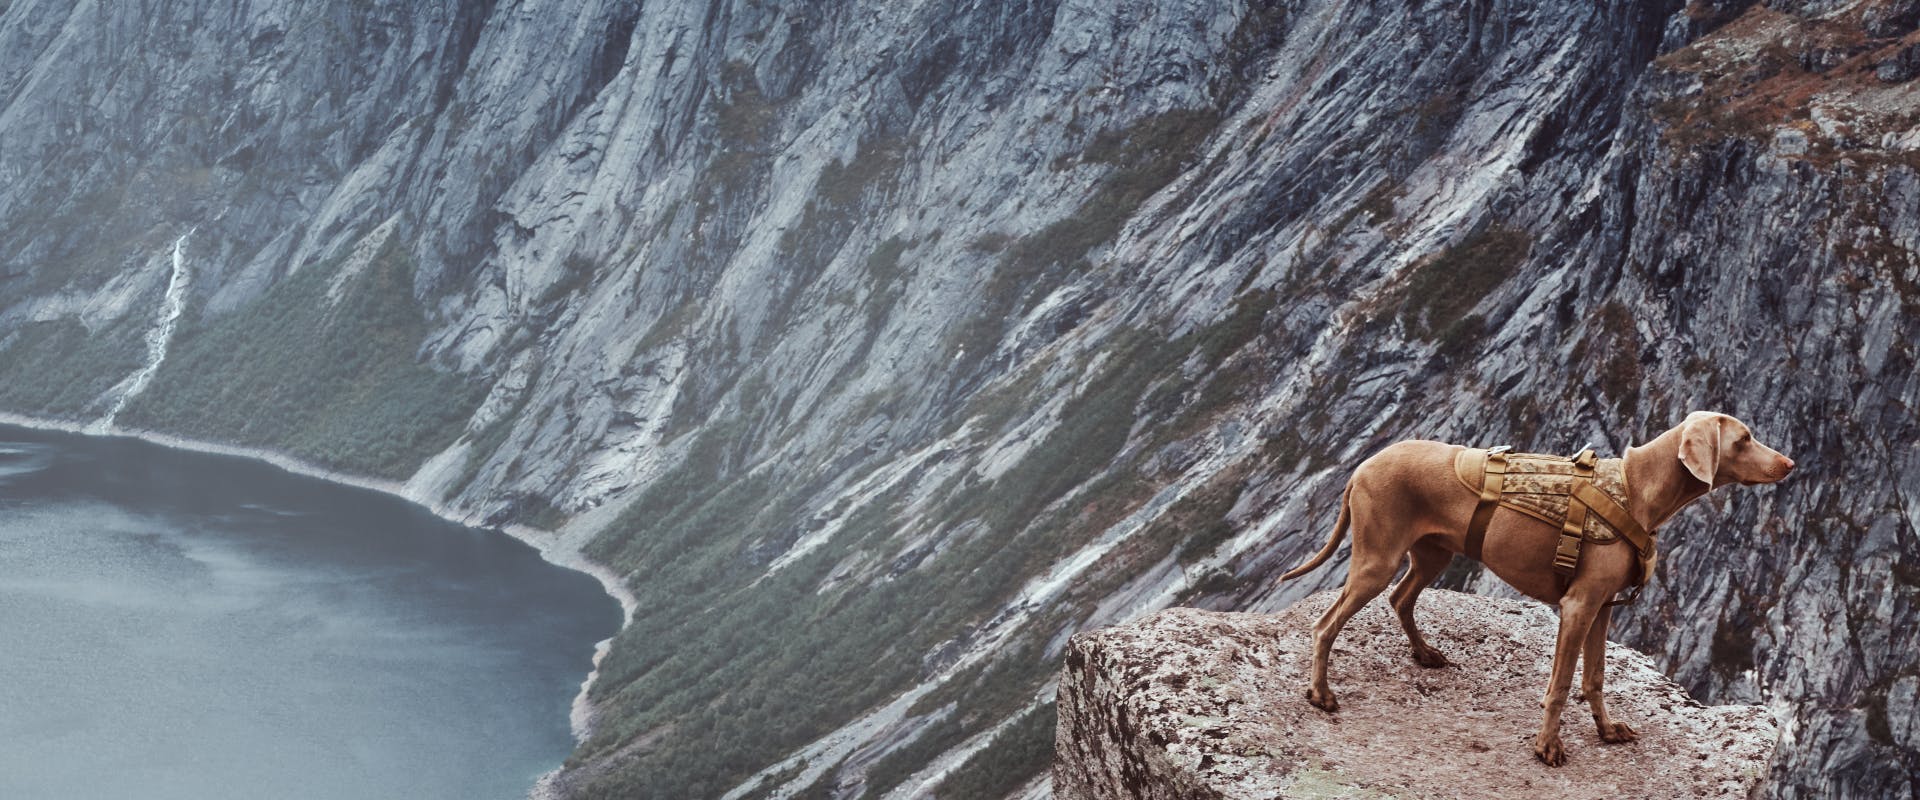 big brown dog stood on a rock edge looking over a mountain lake 